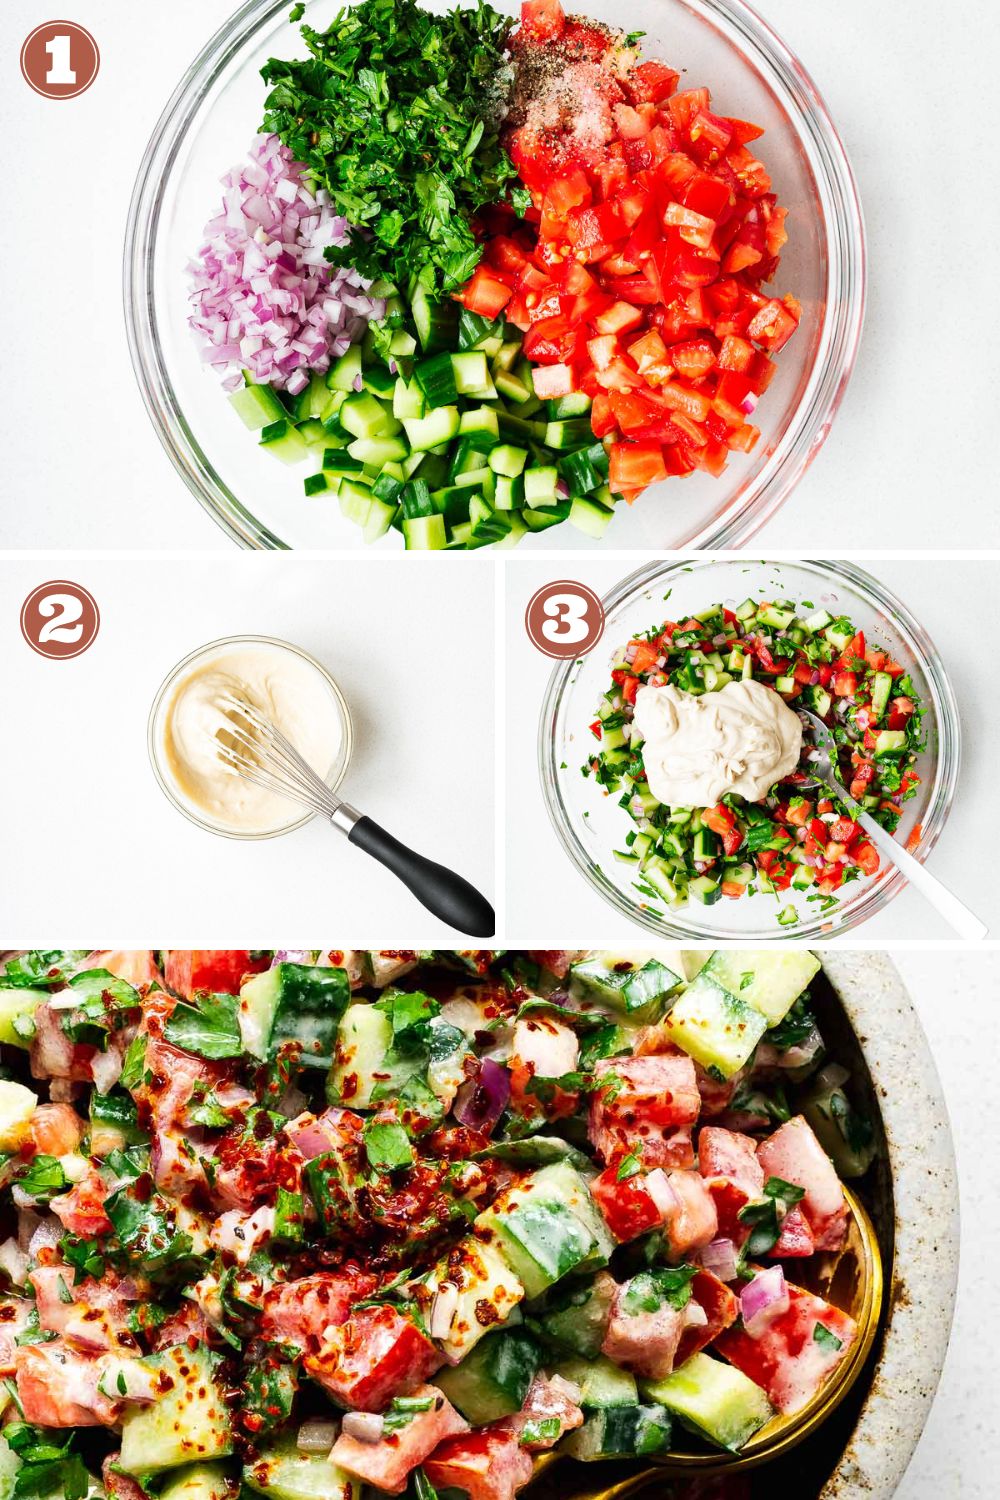 How to make tahini salad in three easy steps: prepare ingredients, make the tahini sauce and assemble the salad.